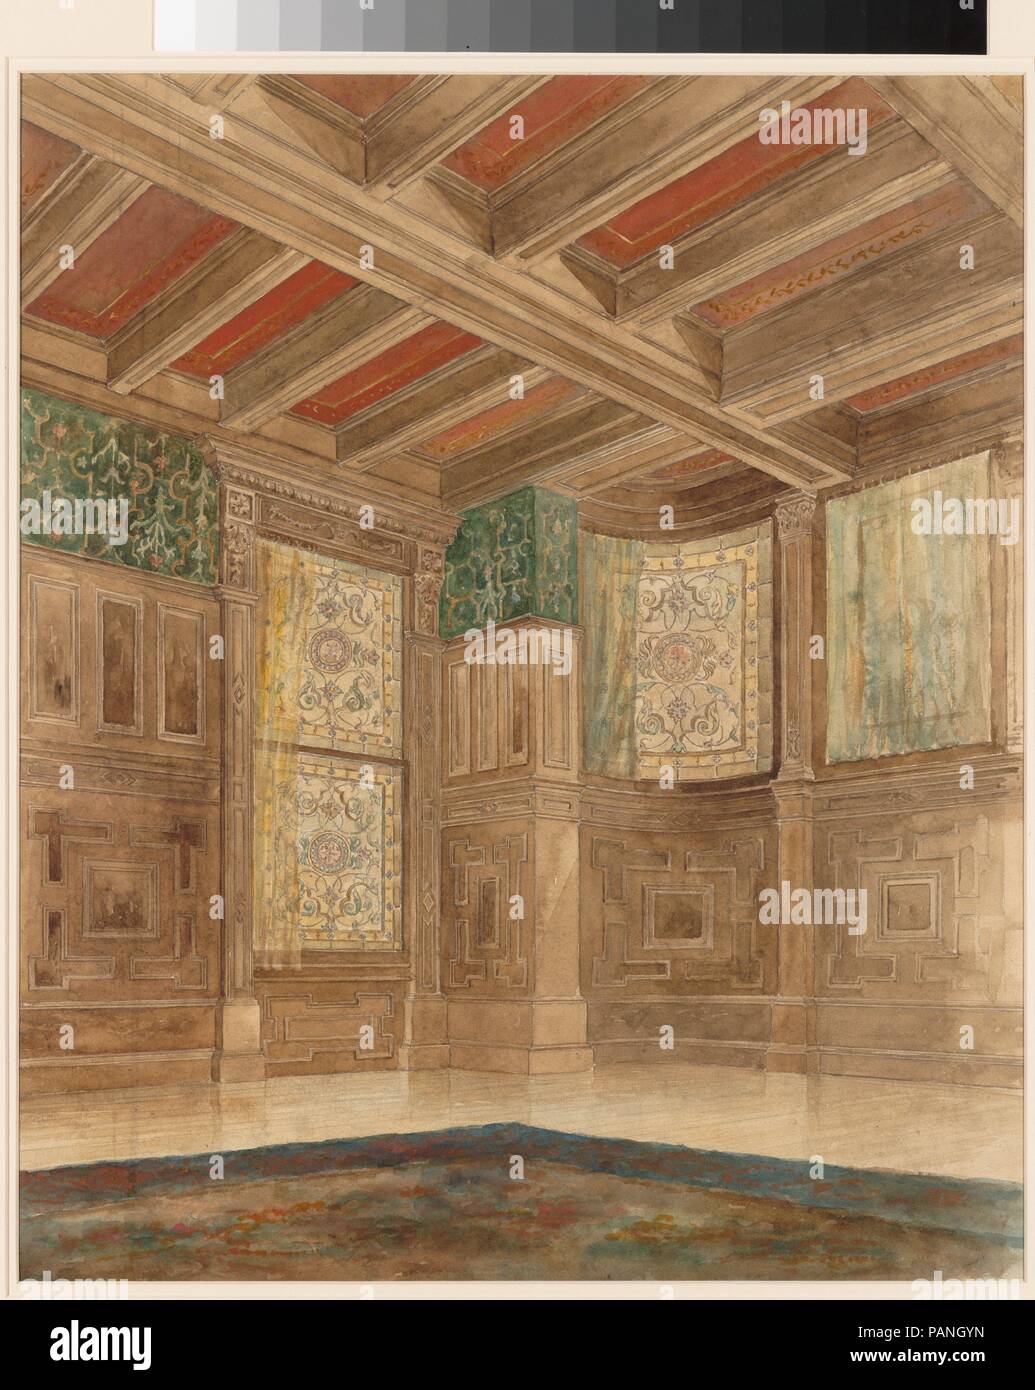 Design for an interior. Artist: Louis Comfort Tiffany (American, New York 1848-1933 New York). Culture: American. Dimensions: 20 7/8 x 18 1/2 in. (53 x 47 cm). Maker: Tiffany Glass and Decorating Company (American, 1892-1902). Date: 1892-1902.  While Tiffany was famous for his Aesthetic-style interiors, this highly finished design for a Renaissance Revival interior shows his ability in other modes as well.  Here, he presents a fully coordinated environment: note how the salmon color of the coffers is picked up in the strapwork-patterned wall covering, the leaded-glass windows, and even the loz Stock Photo